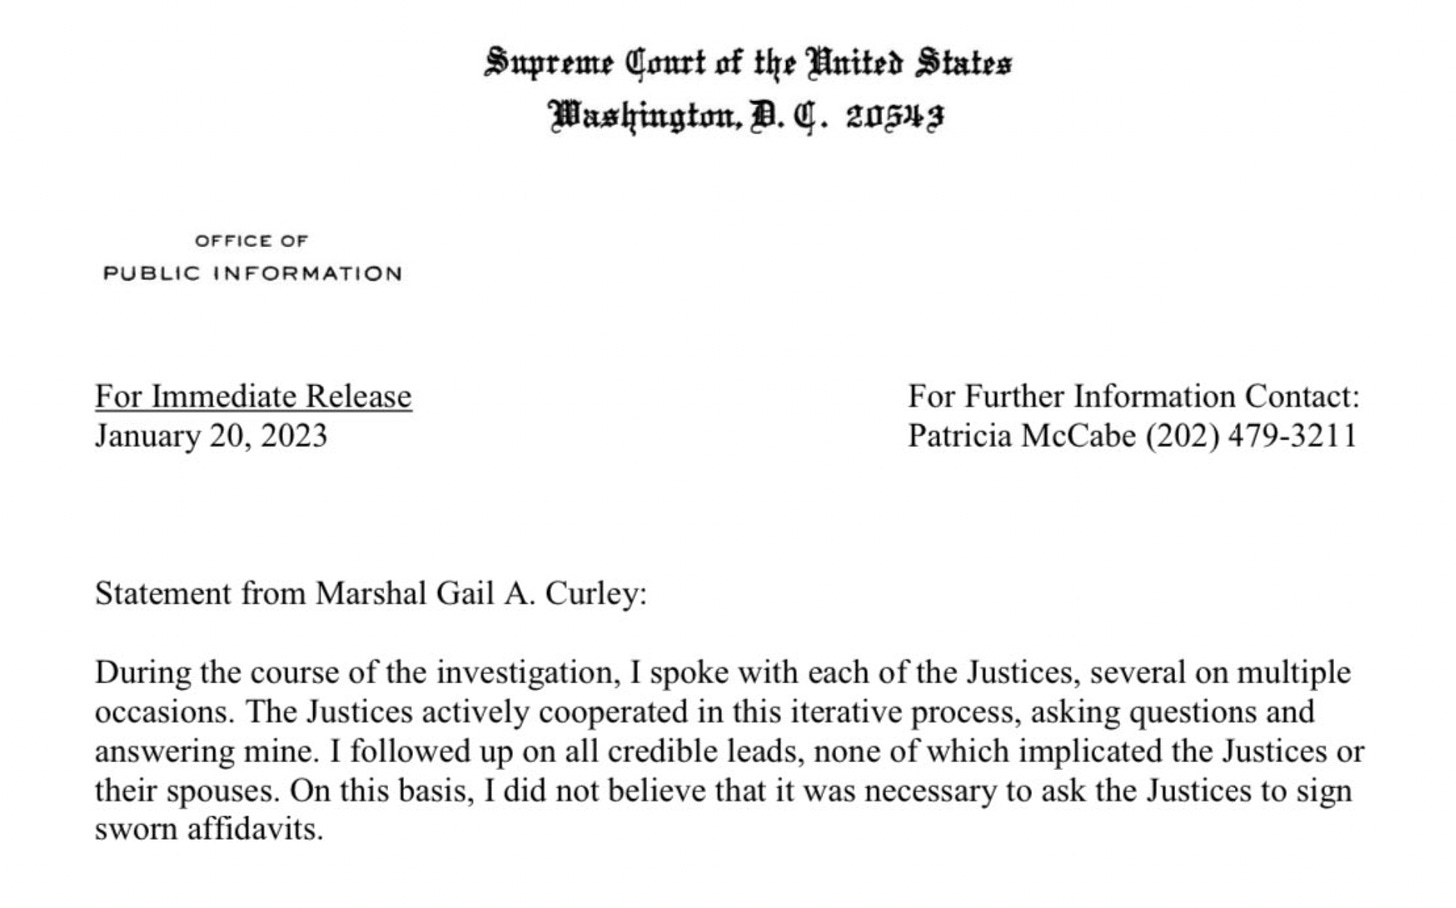 Statement from Marshal Gail A. Curley: During the course of the investigation, I spoke with each of the Justices, several on multiple occasions. The Justices actively cooperated in this iterative process, asking questions and answering mine. I followed up on all credible leads, none of which implicated the Justices or their spouses. On this basis, I did not believe that it was necessary to ask the Justices to sign sworn affidavits.